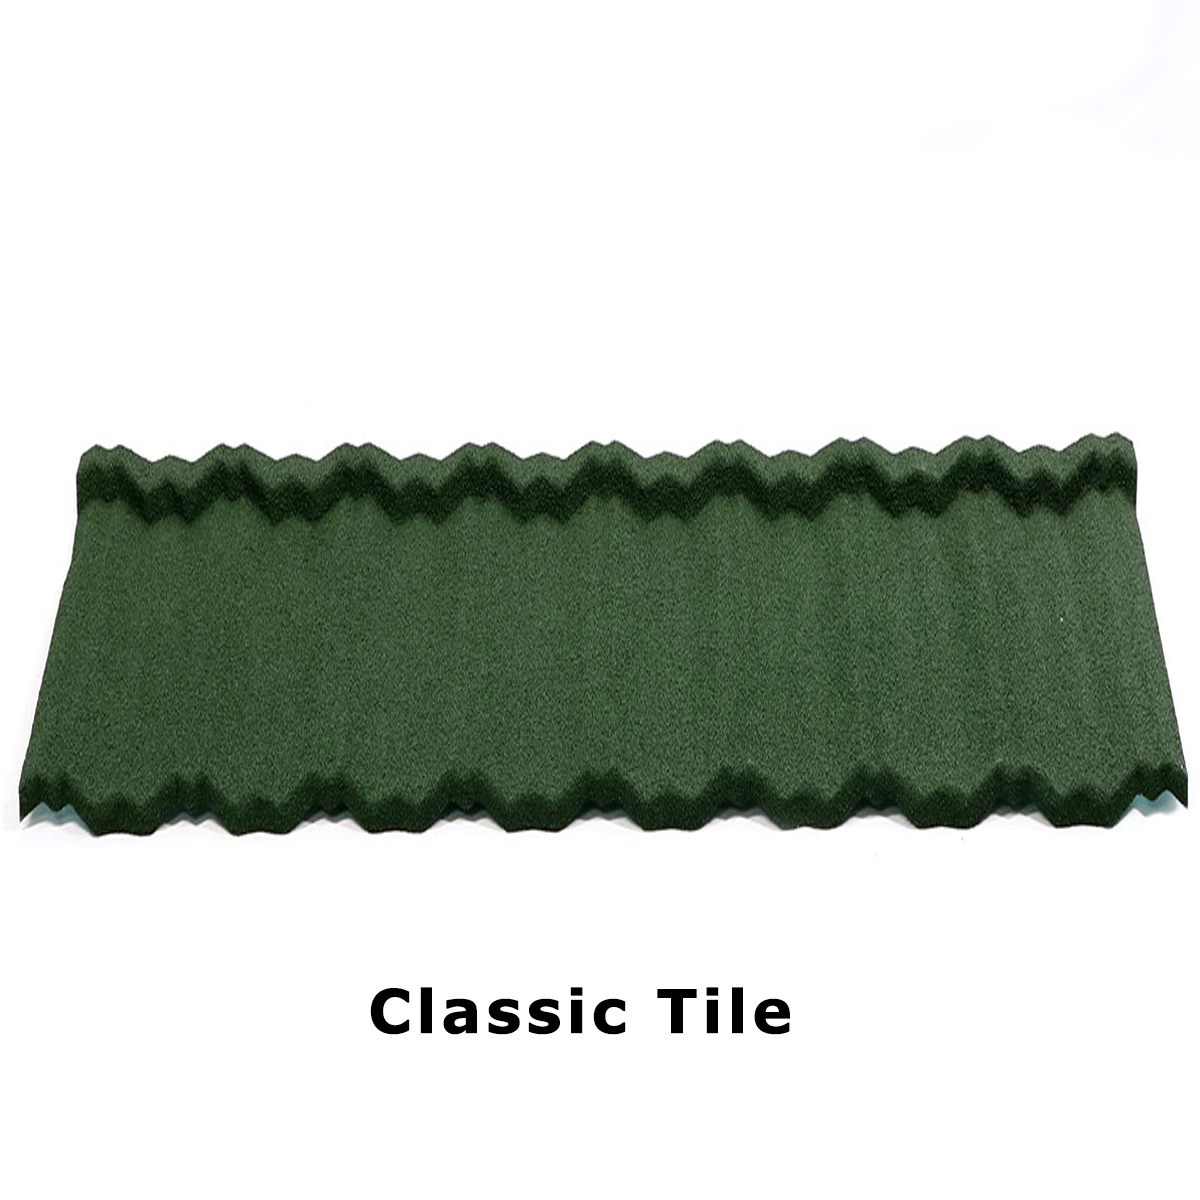 Roof tile roofing sheet galvanlume stone roof tiles terracotta metal sheets